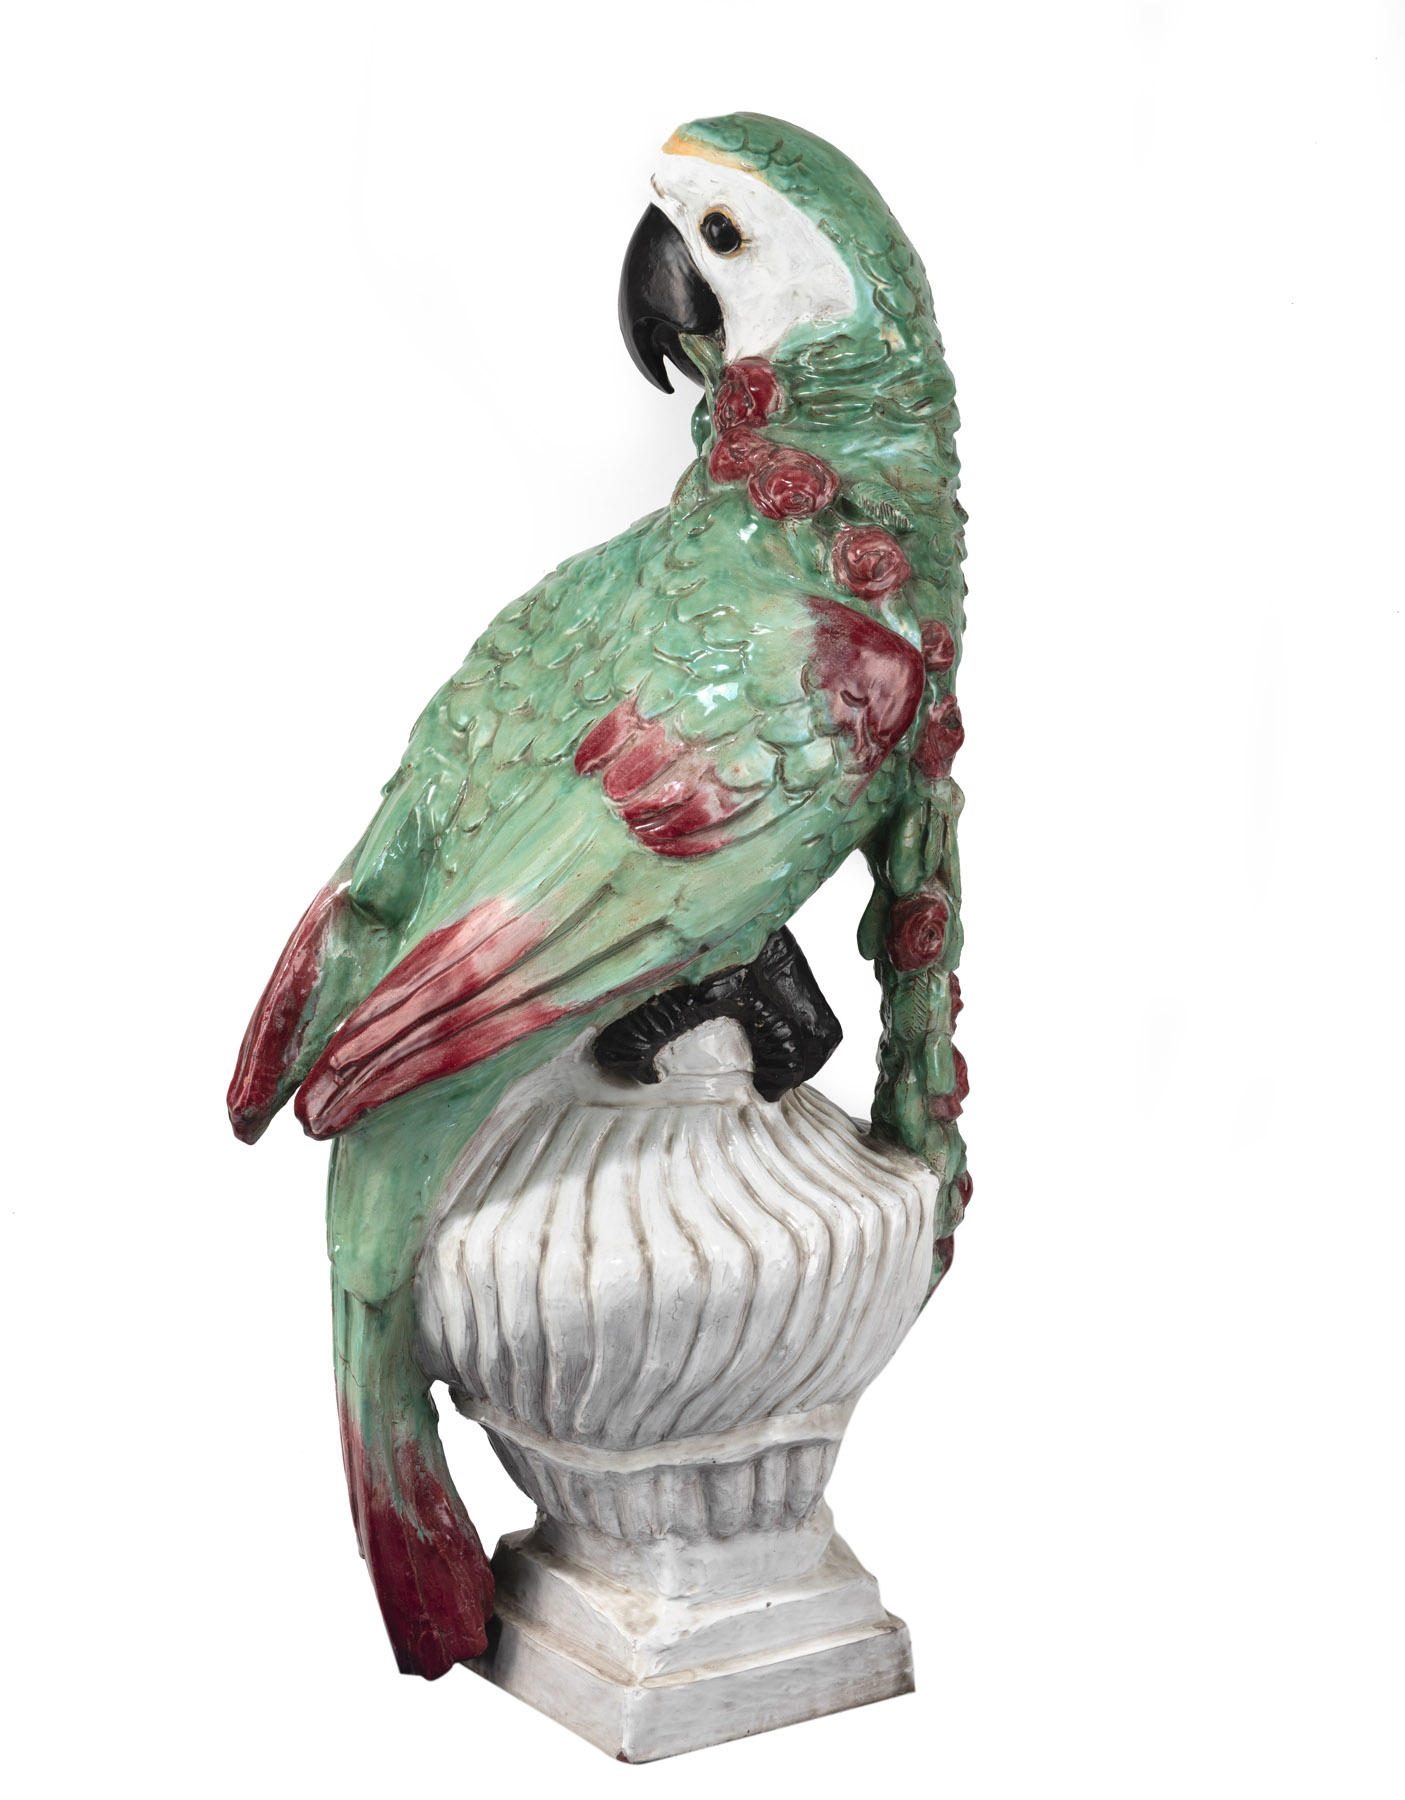 A LARGE NYMPHENBURG MAIOLICA FIGURE OF A MACAW WITH GARLAND - Image 3 of 5